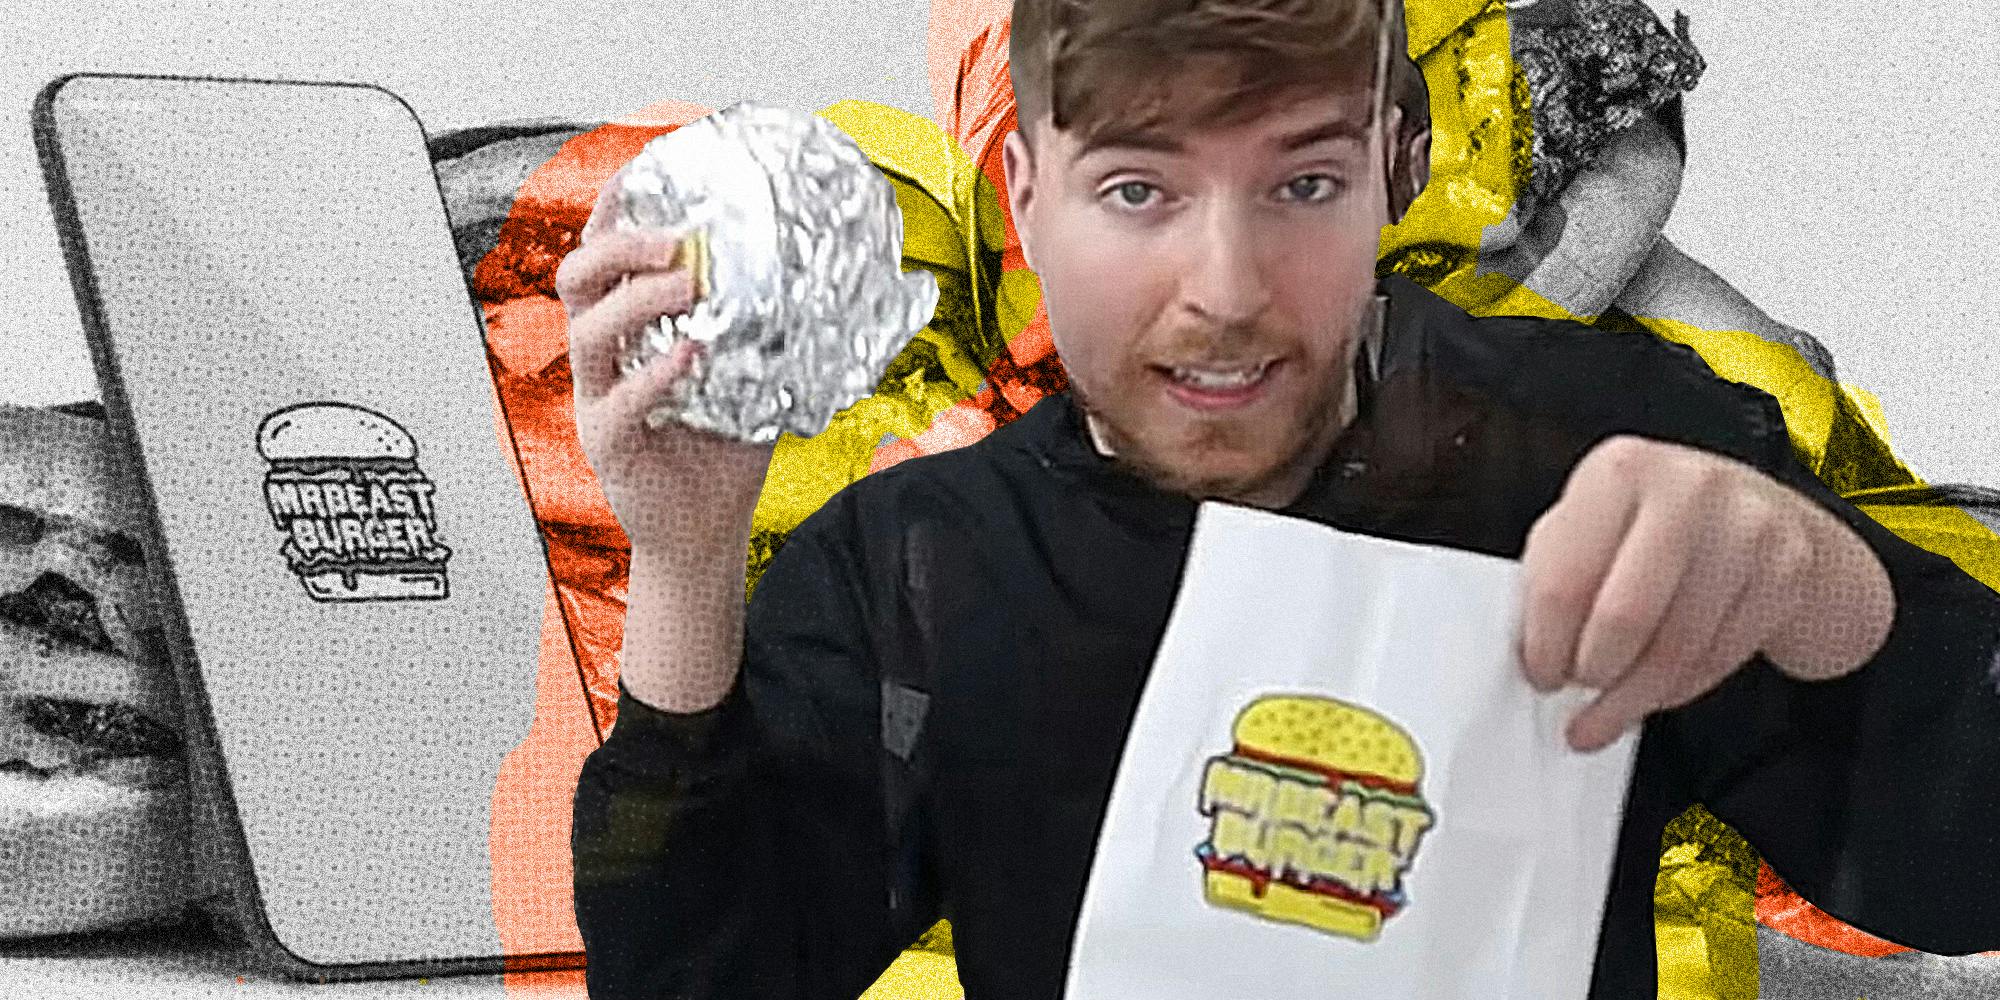 MrBeast Burger Meltdown: Insights for Creator Deals From the Lawsuit